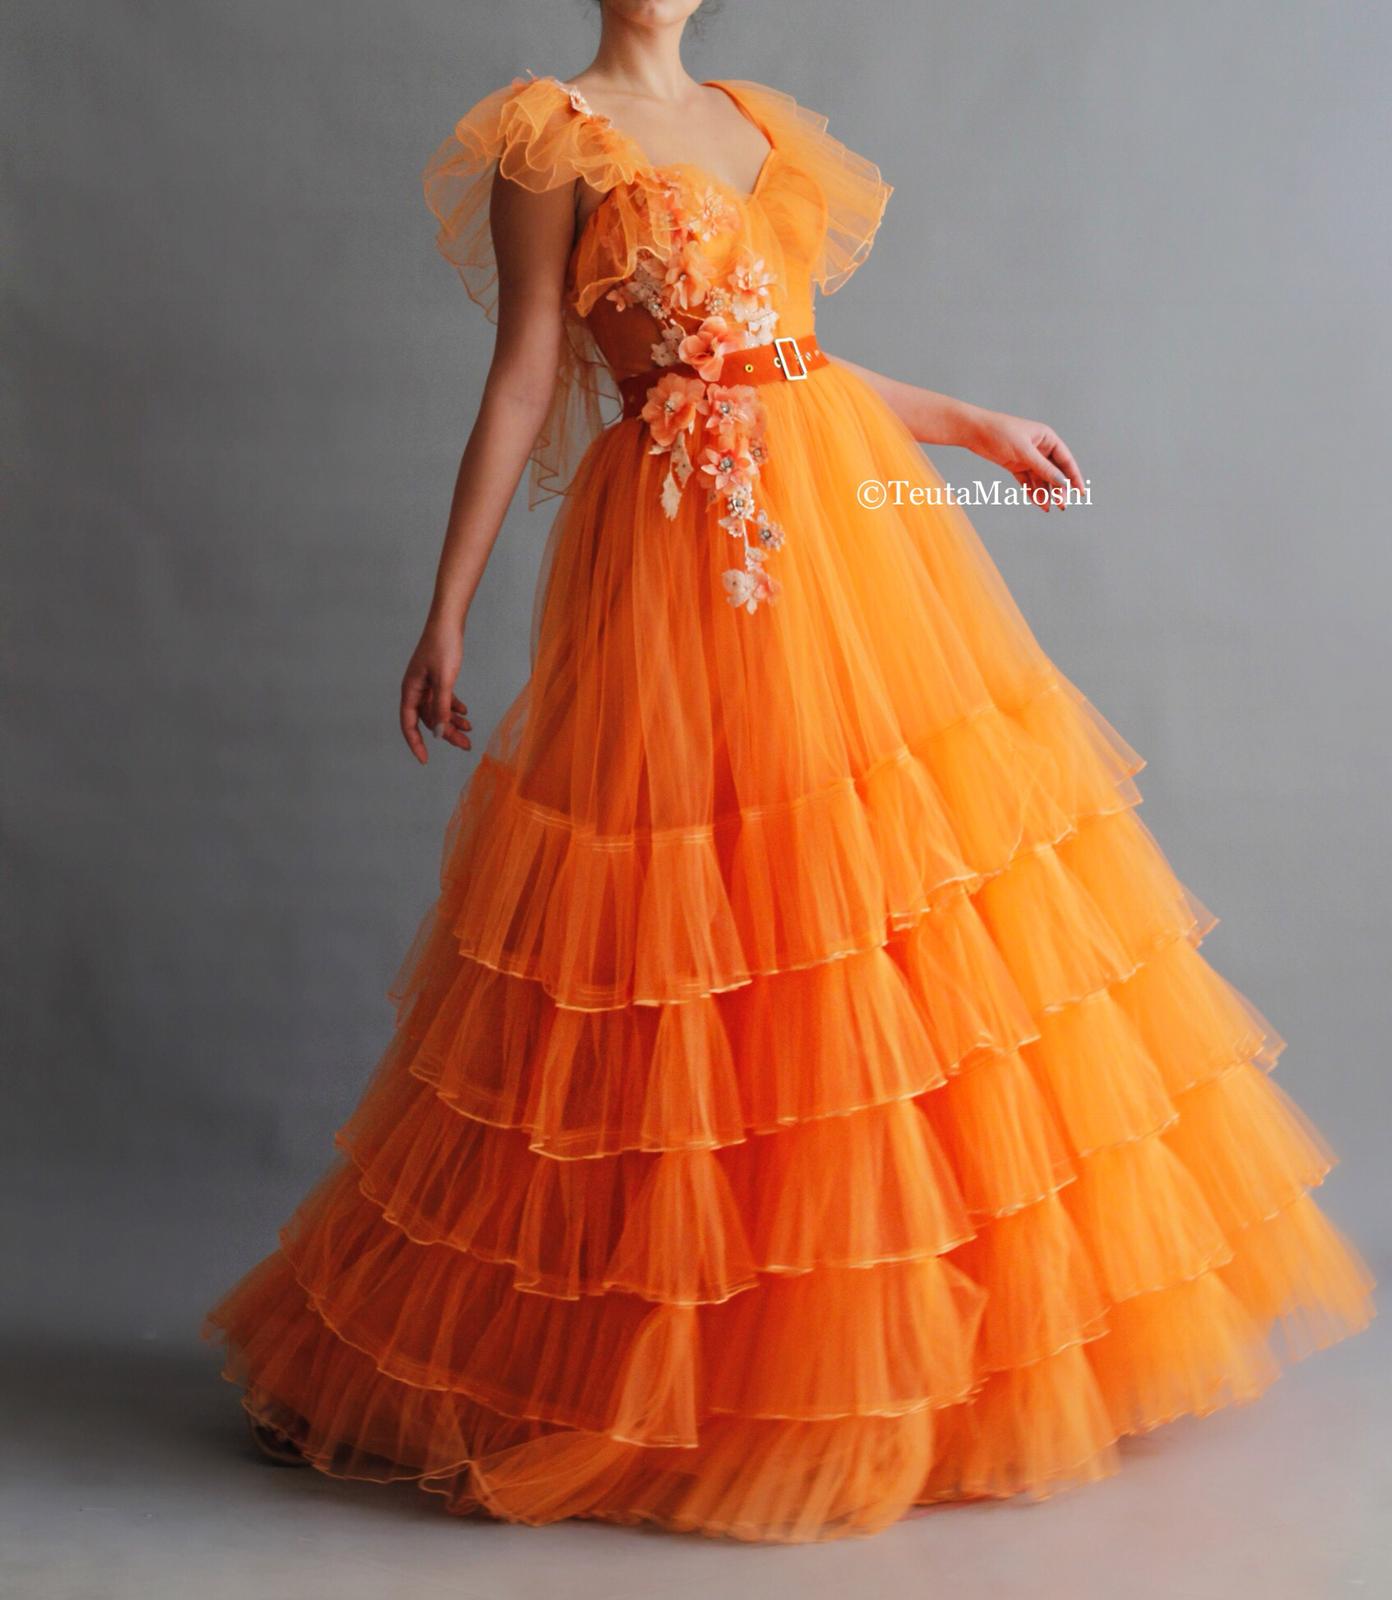 Orange A-Line dress with straps, embroidery and belt